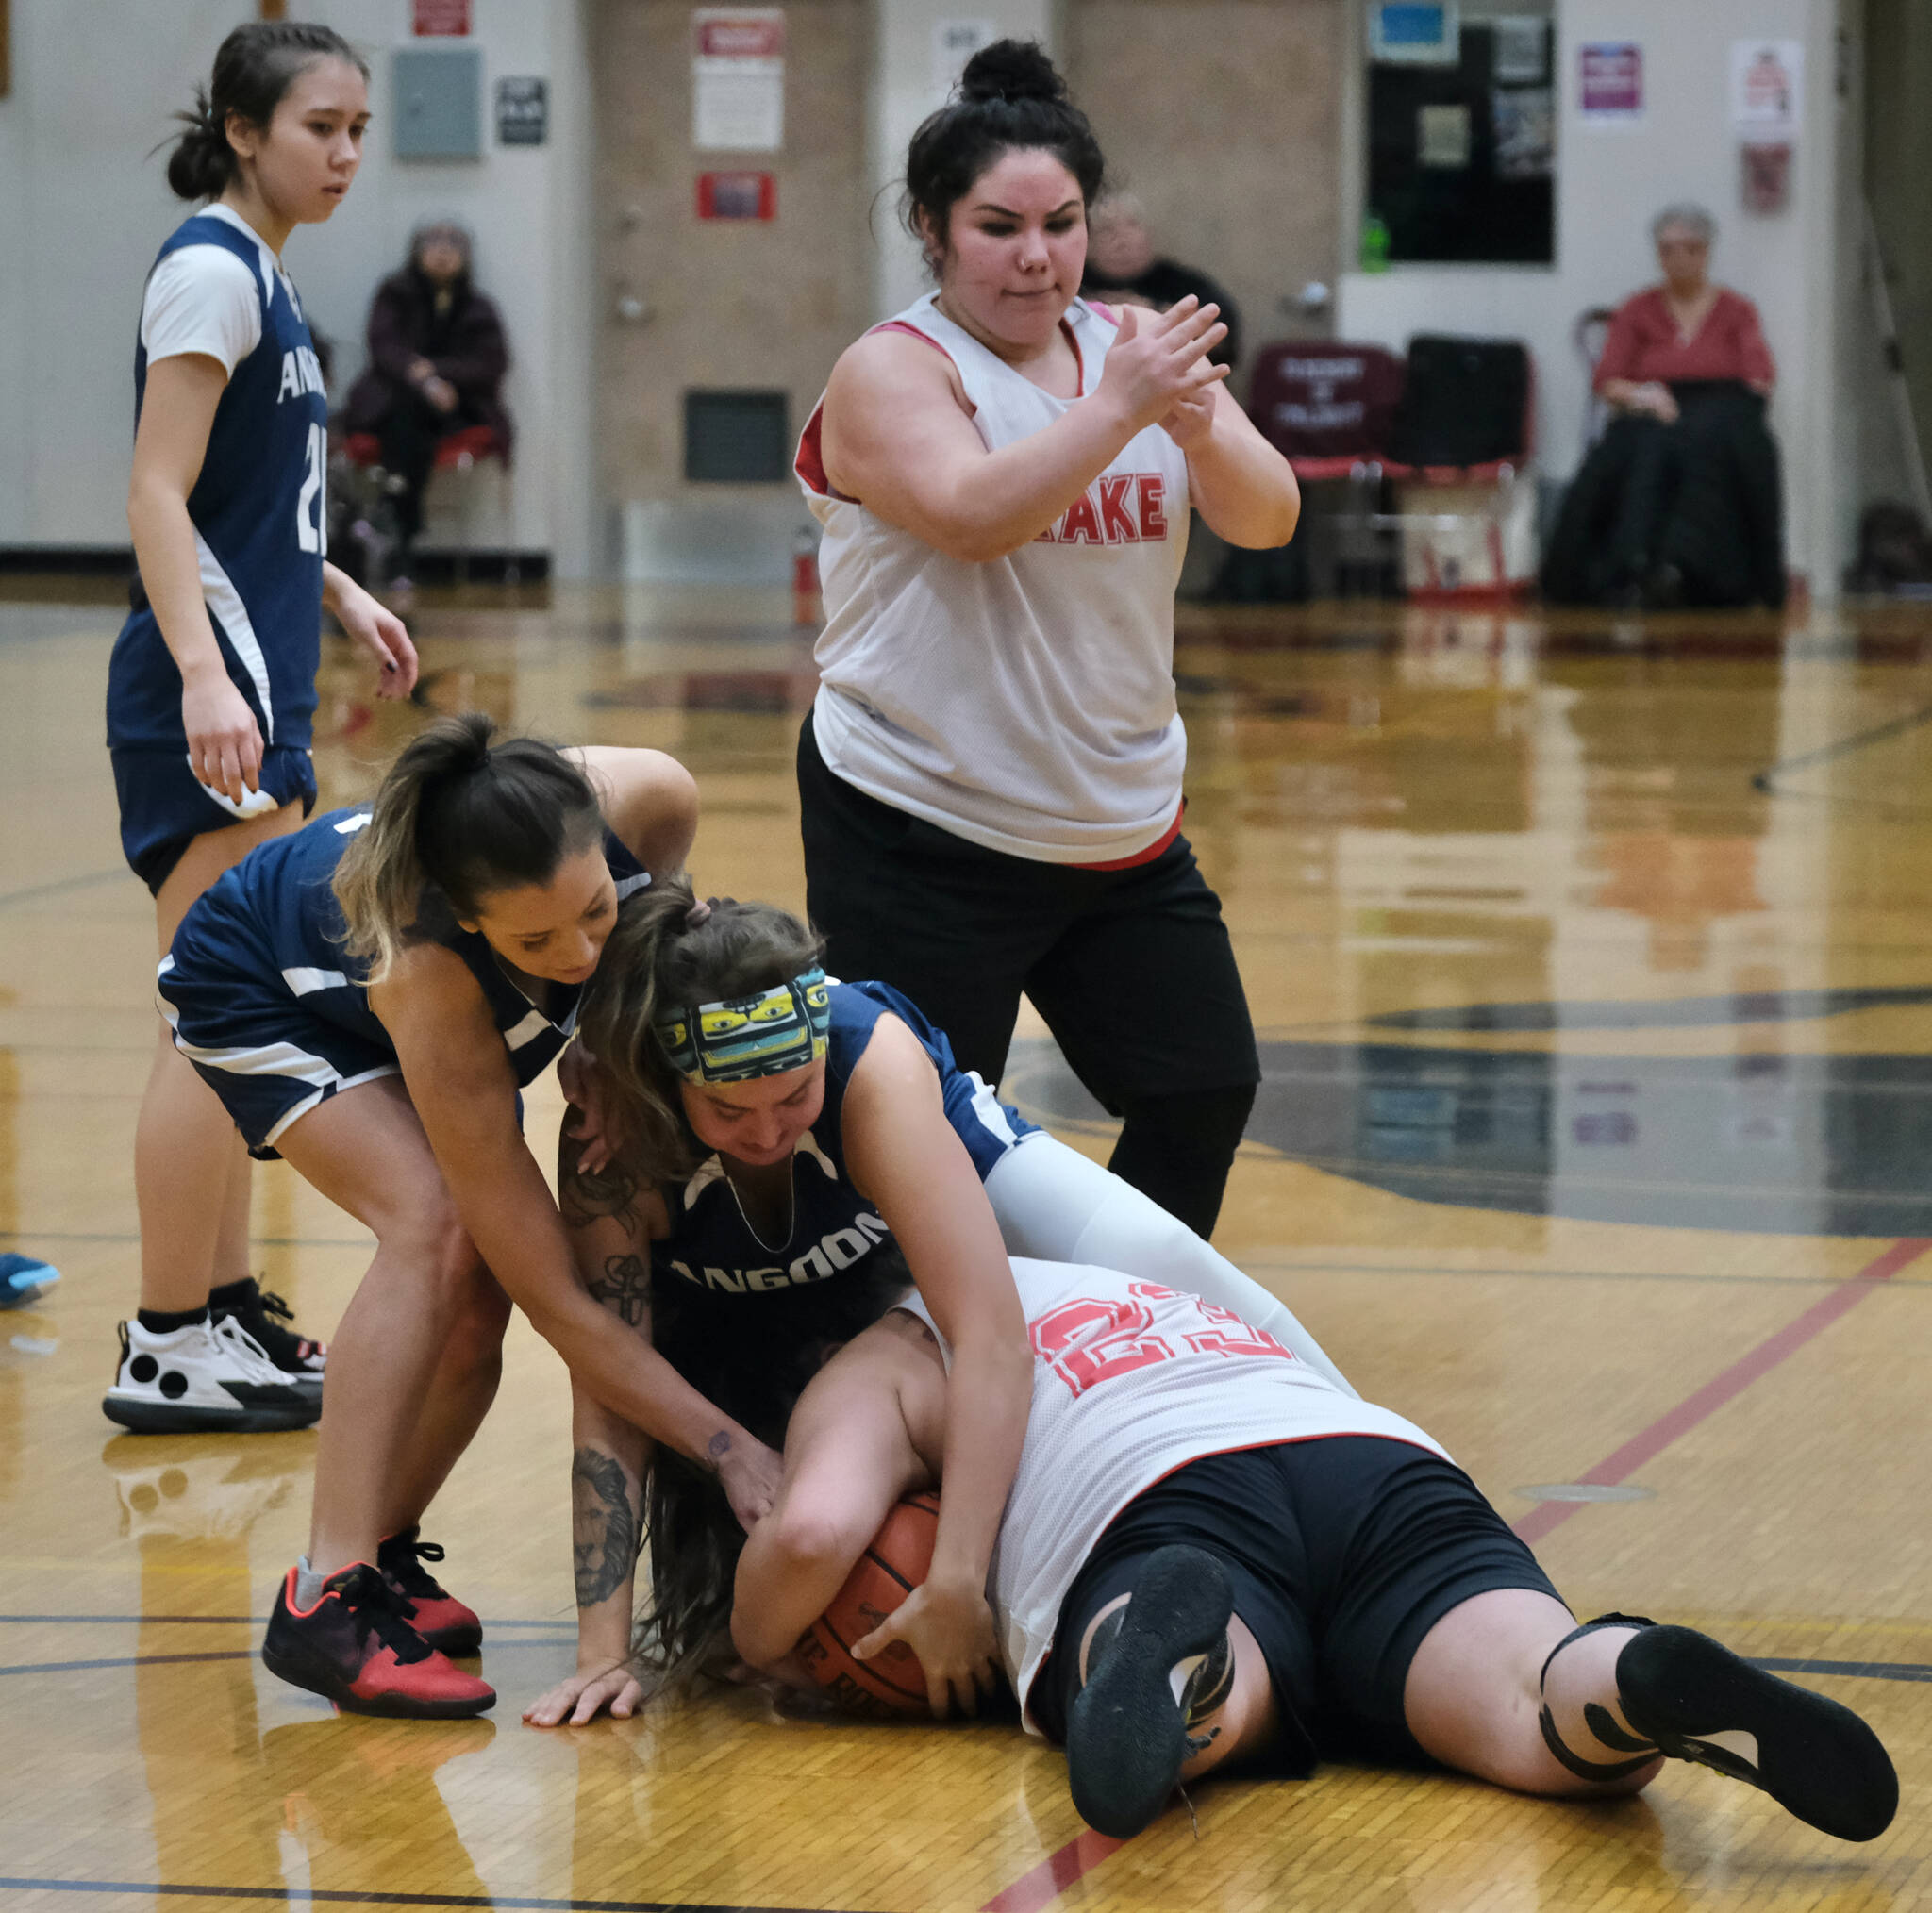 Kake’s Monica Ashenfelter signals for a timeout as teammate Janessa Ashenfelter battles for a loose ball with Angoon’s Carmeleeda Estrada and Ladonna Byers during Thursday action at the Juneau Lions Club 74th Annual Gold Medal Basketball Tournament at Juneau-Douglas High School: Yadaa.at Kalé. (Klas Stolpe/For the Juneau Empire)